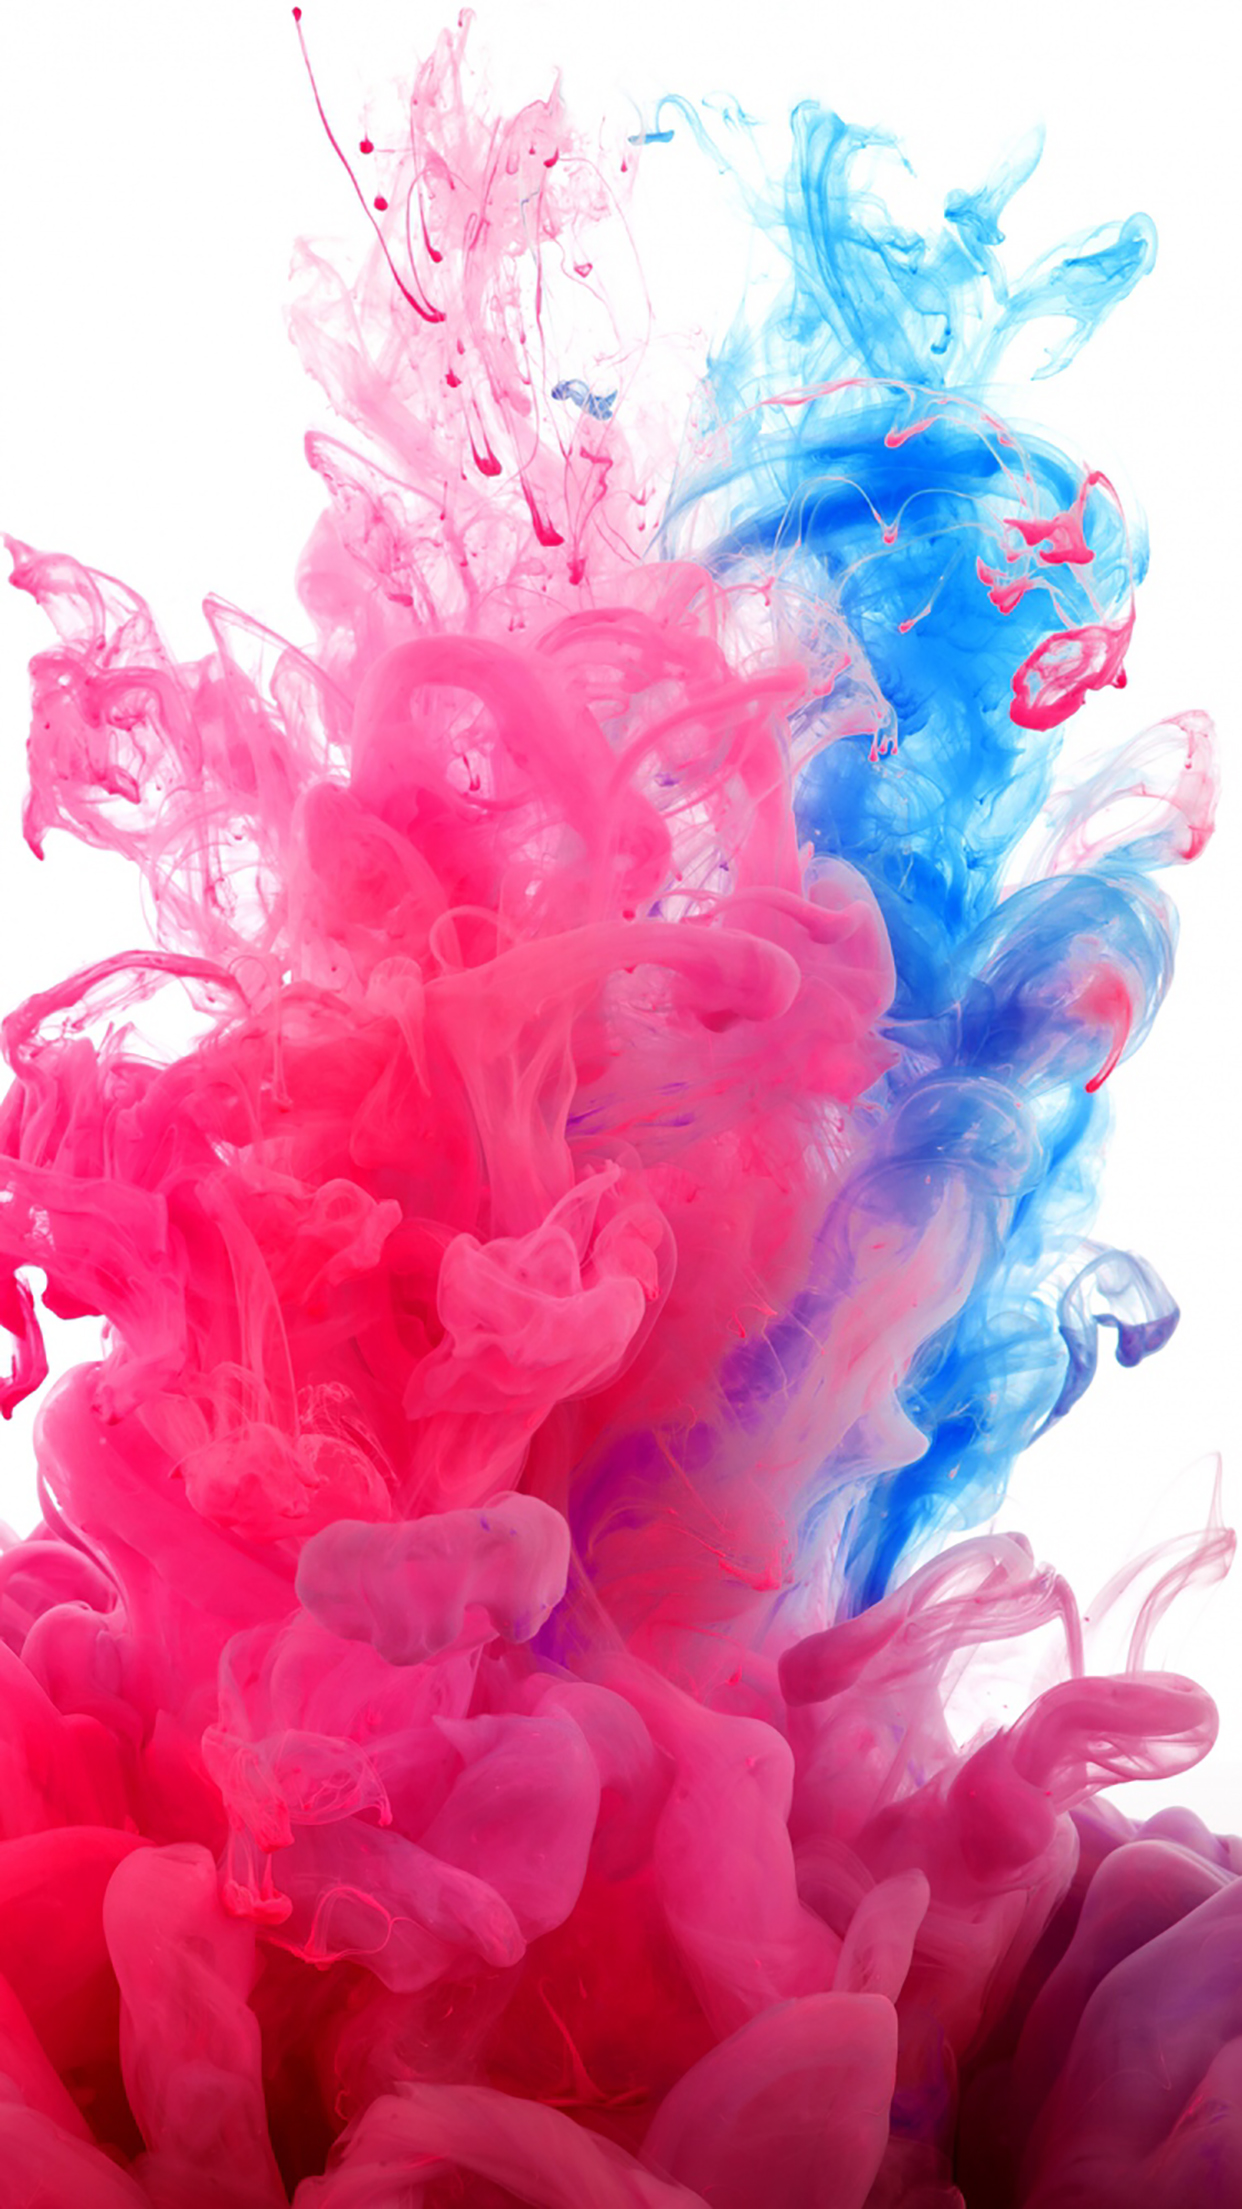 Ink Pink And Blue 3wallpapers Iphone Parallax Ink - Smoke Wallpaper White Background , HD Wallpaper & Backgrounds